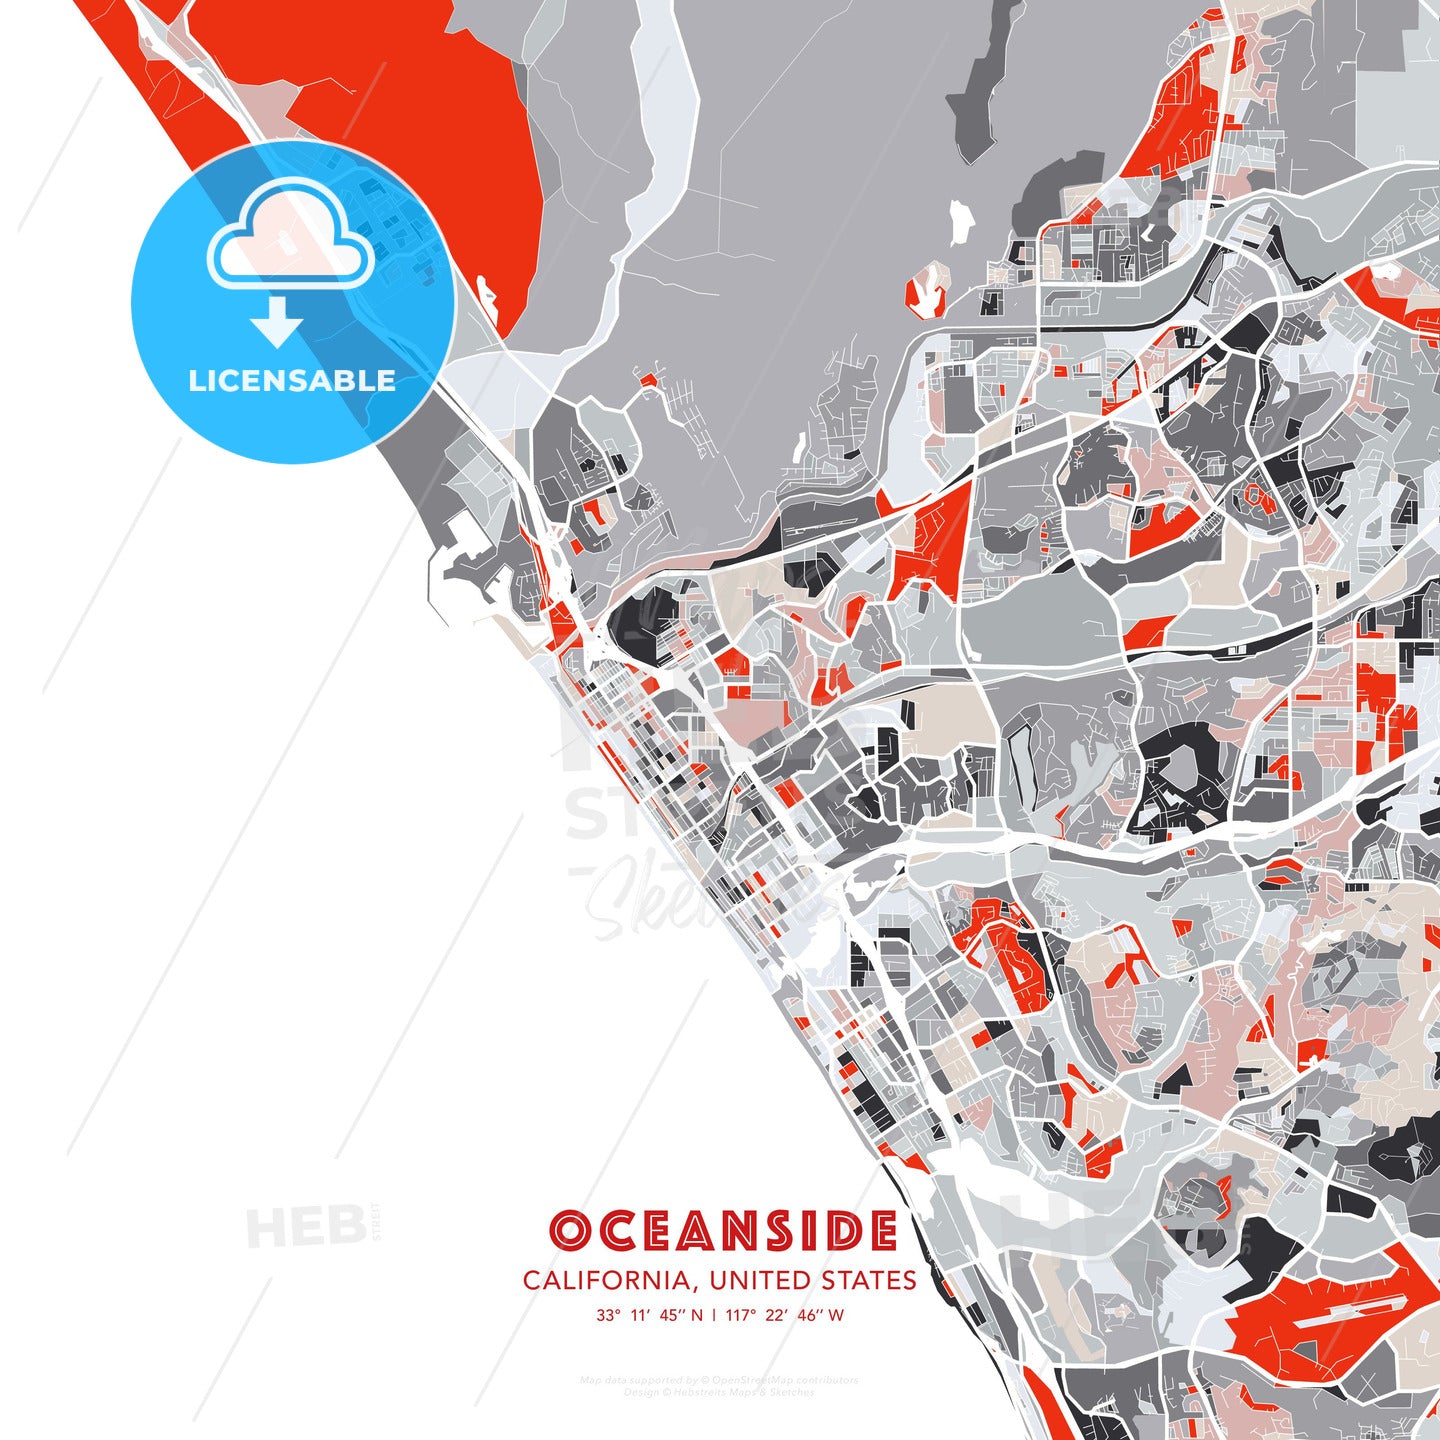 Oceanside, California, United States, modern map - HEBSTREITS Sketches